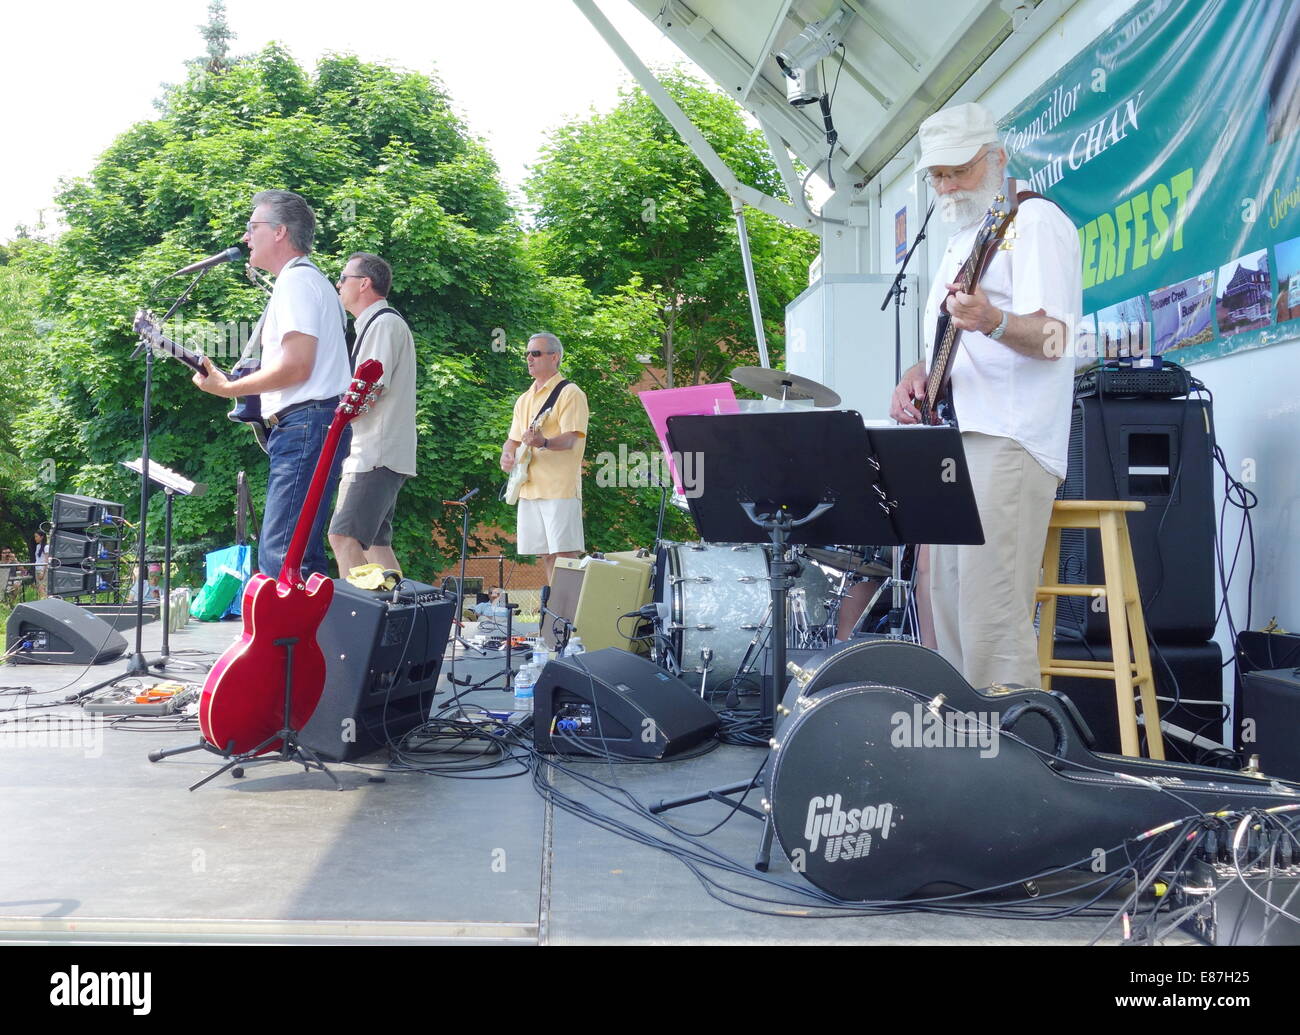 Tribute band playing on stage at an outdoor event outside Toronto, Canada  Stock Photo - Alamy